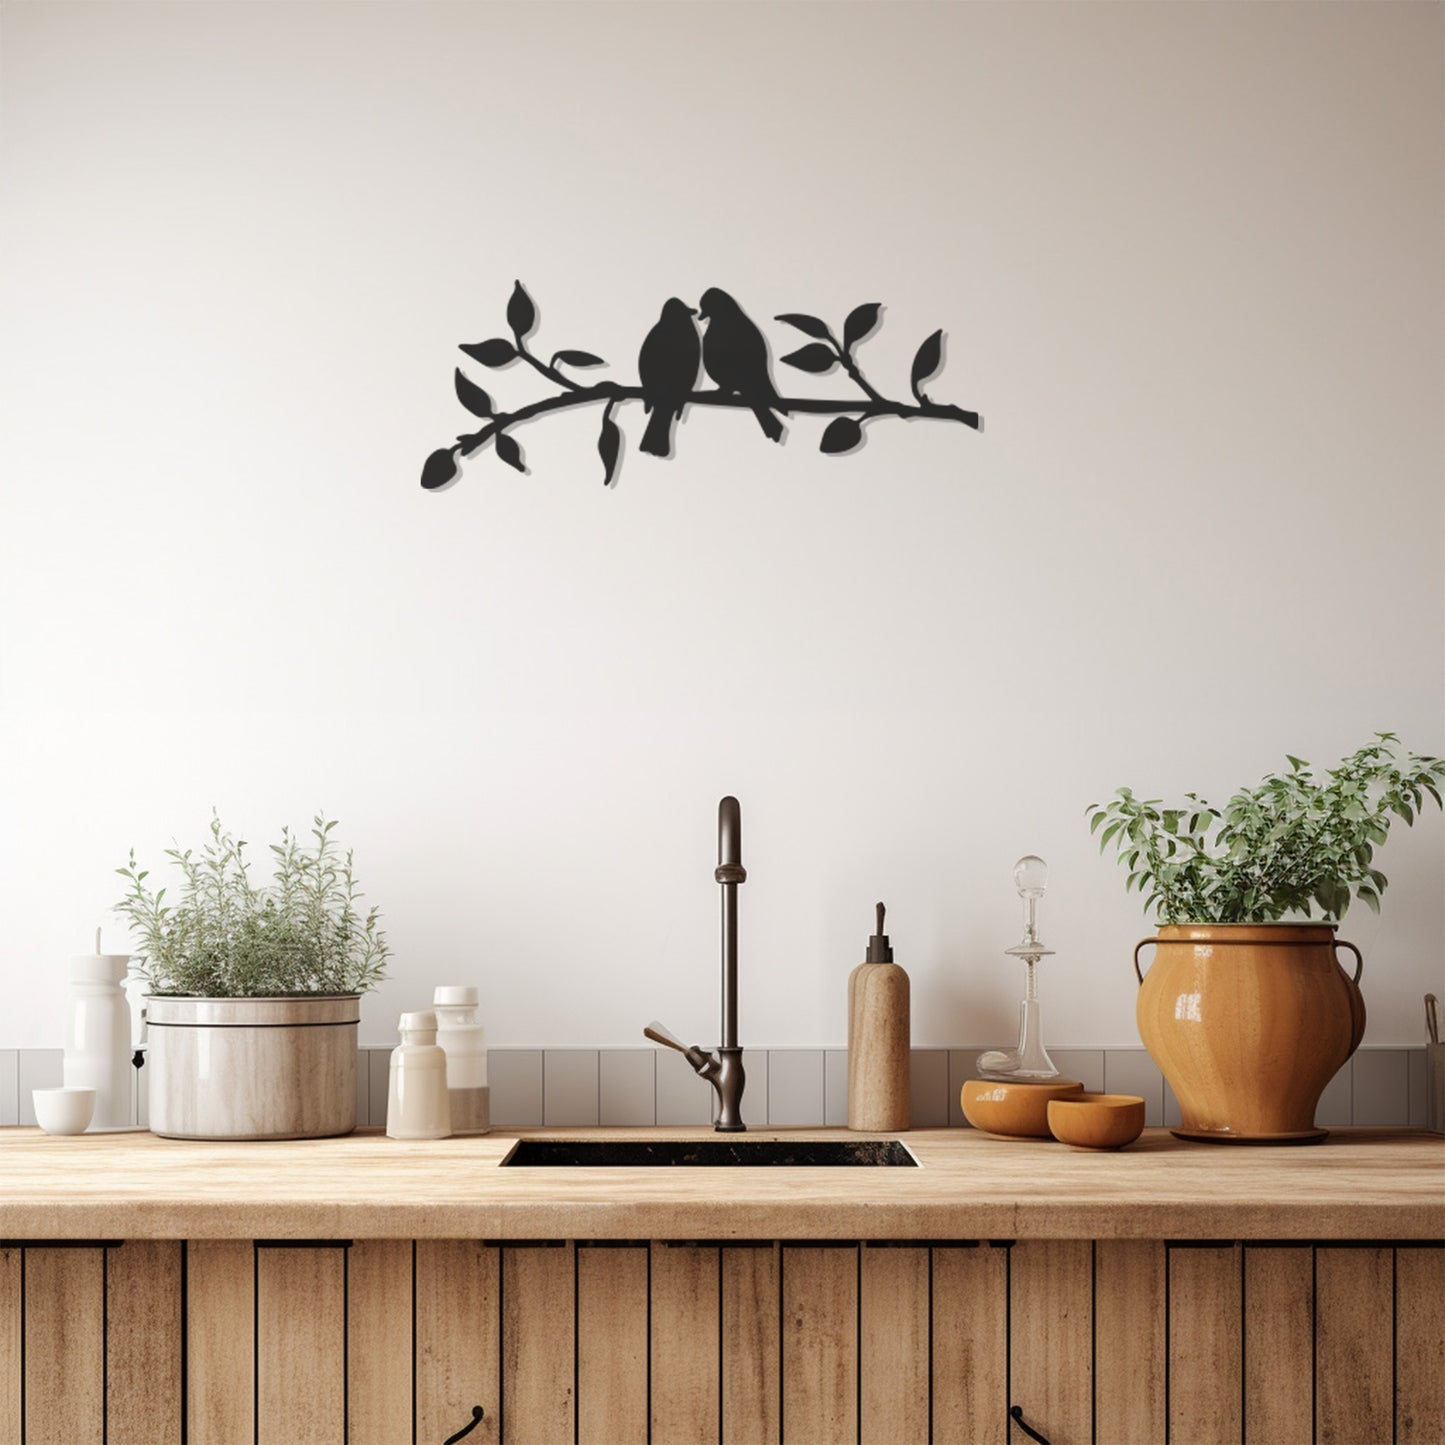 Silhouette Of 2 Birds Sitting On A Tree Branch Metal Wall Decor